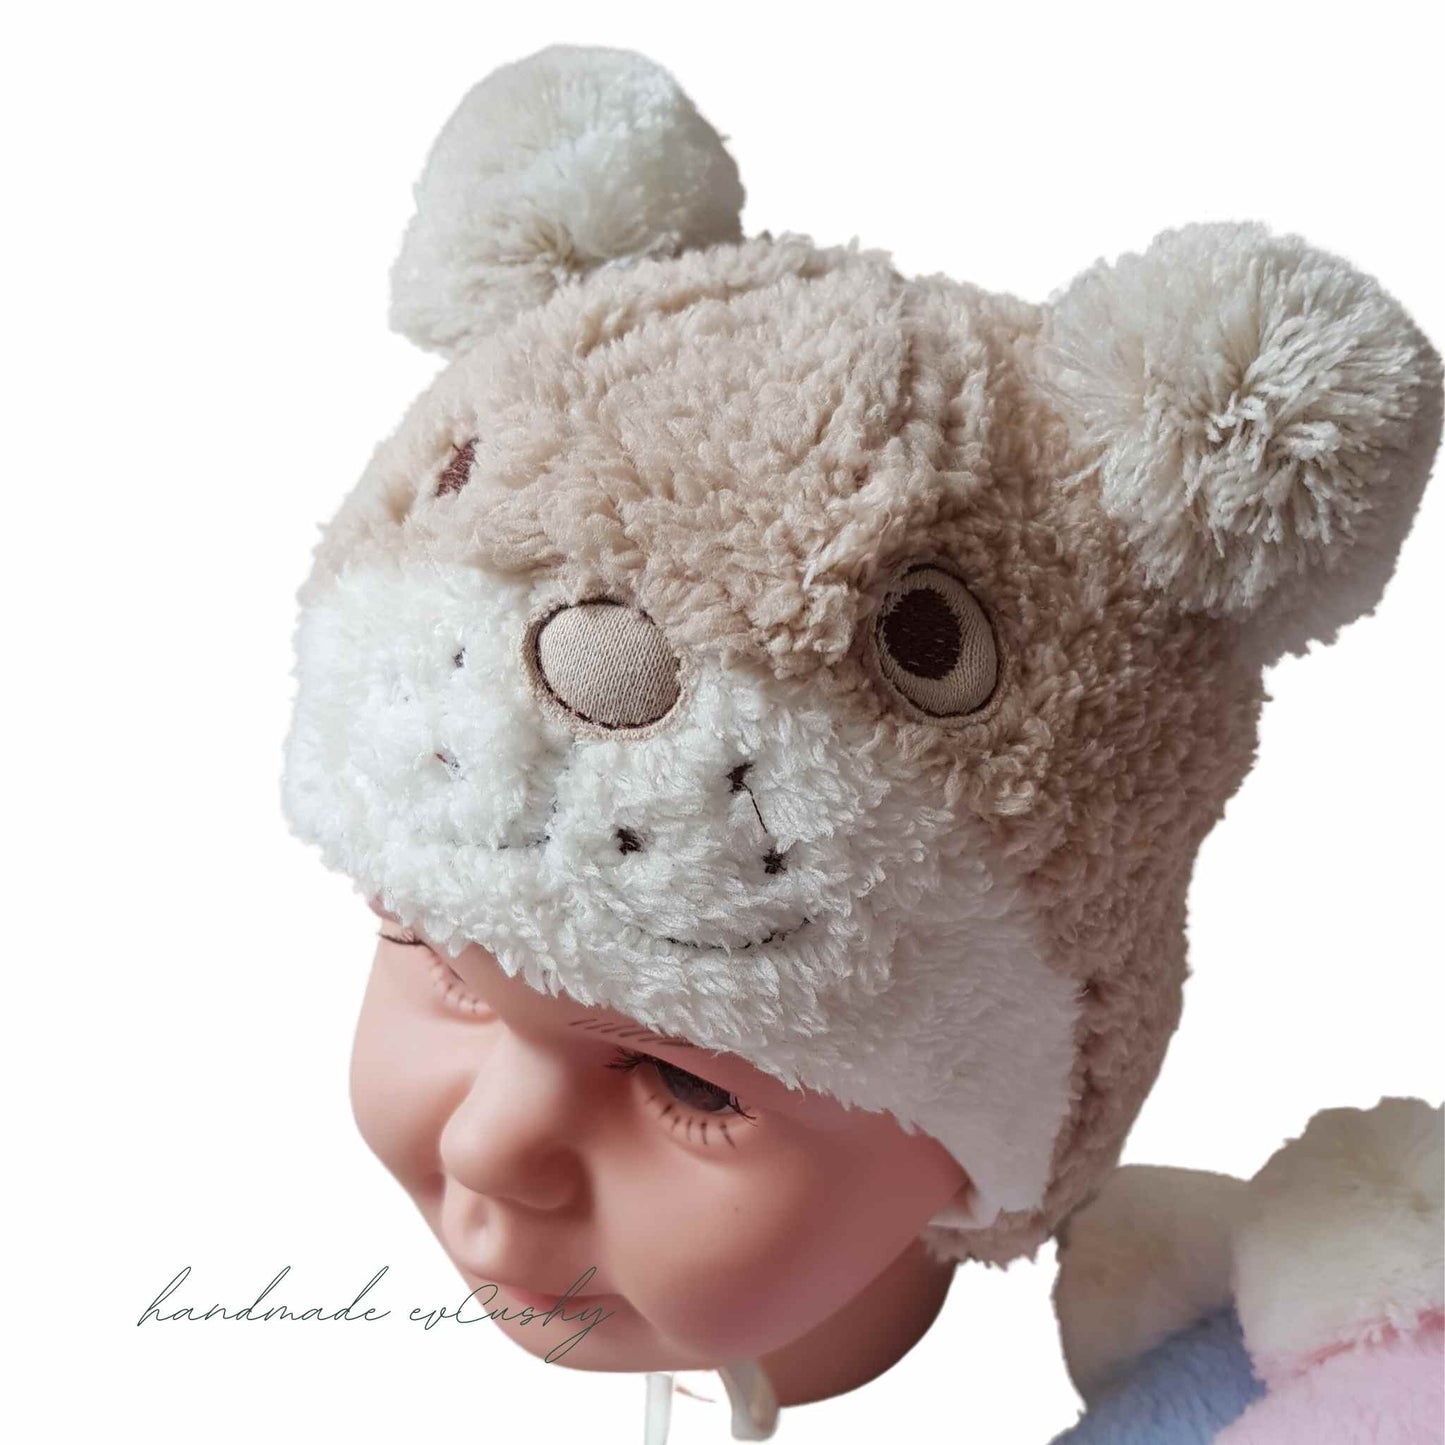 Winking Teddy Bear Winter Baby Hat: Cozy Unisex Style in Blue, Brown, and Pink